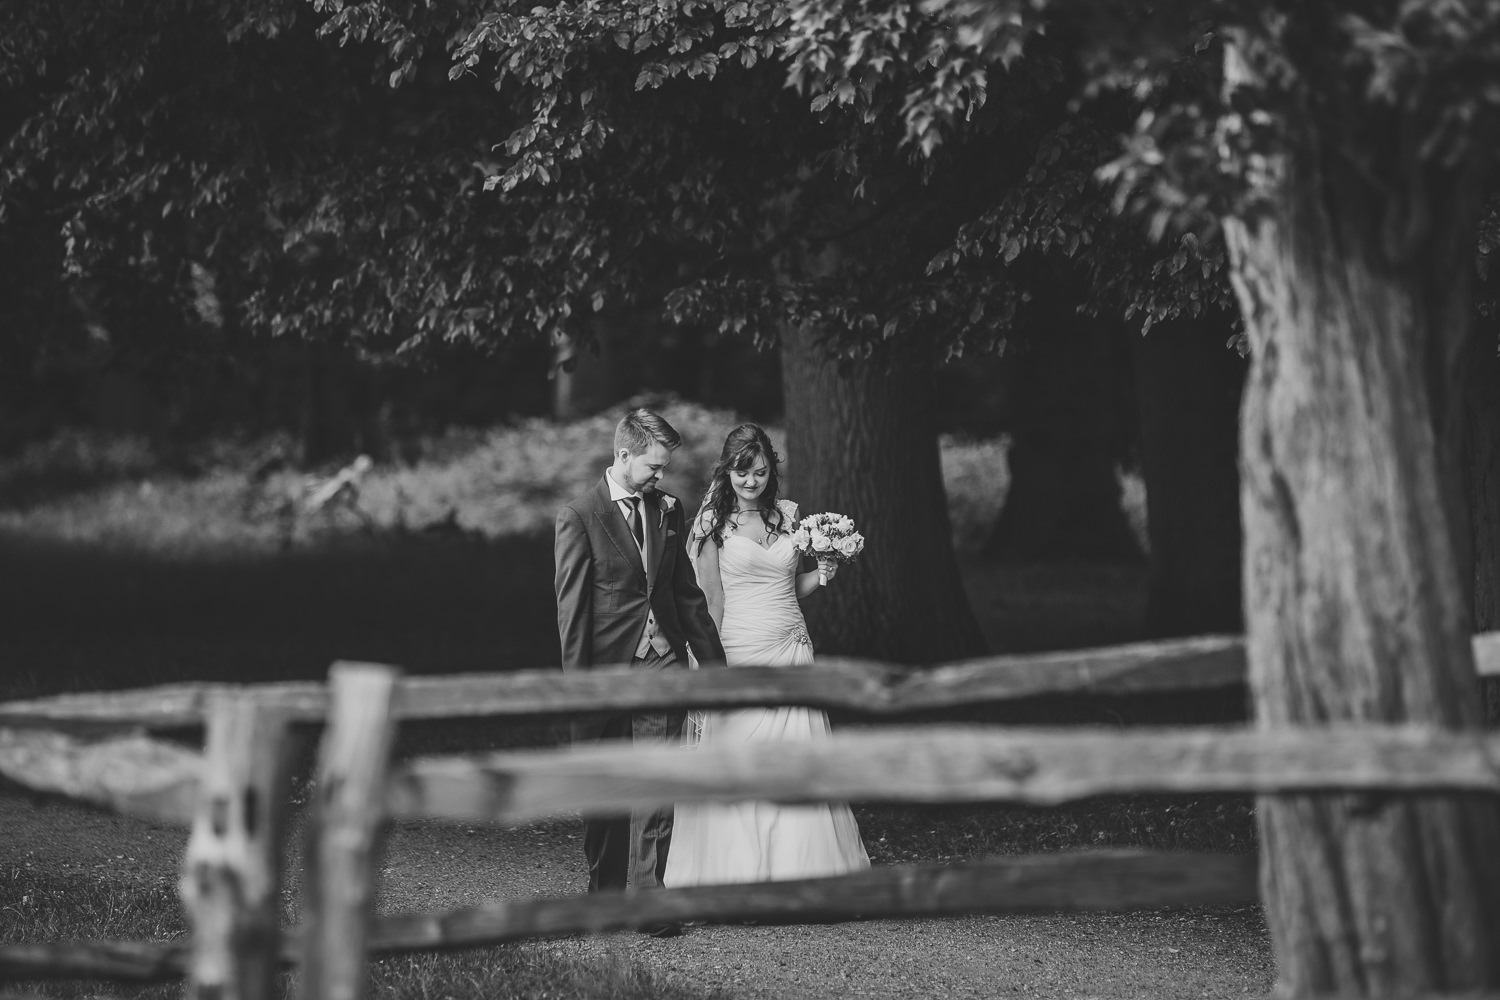 Black and white wedding photo of bride and groom walking in the park.